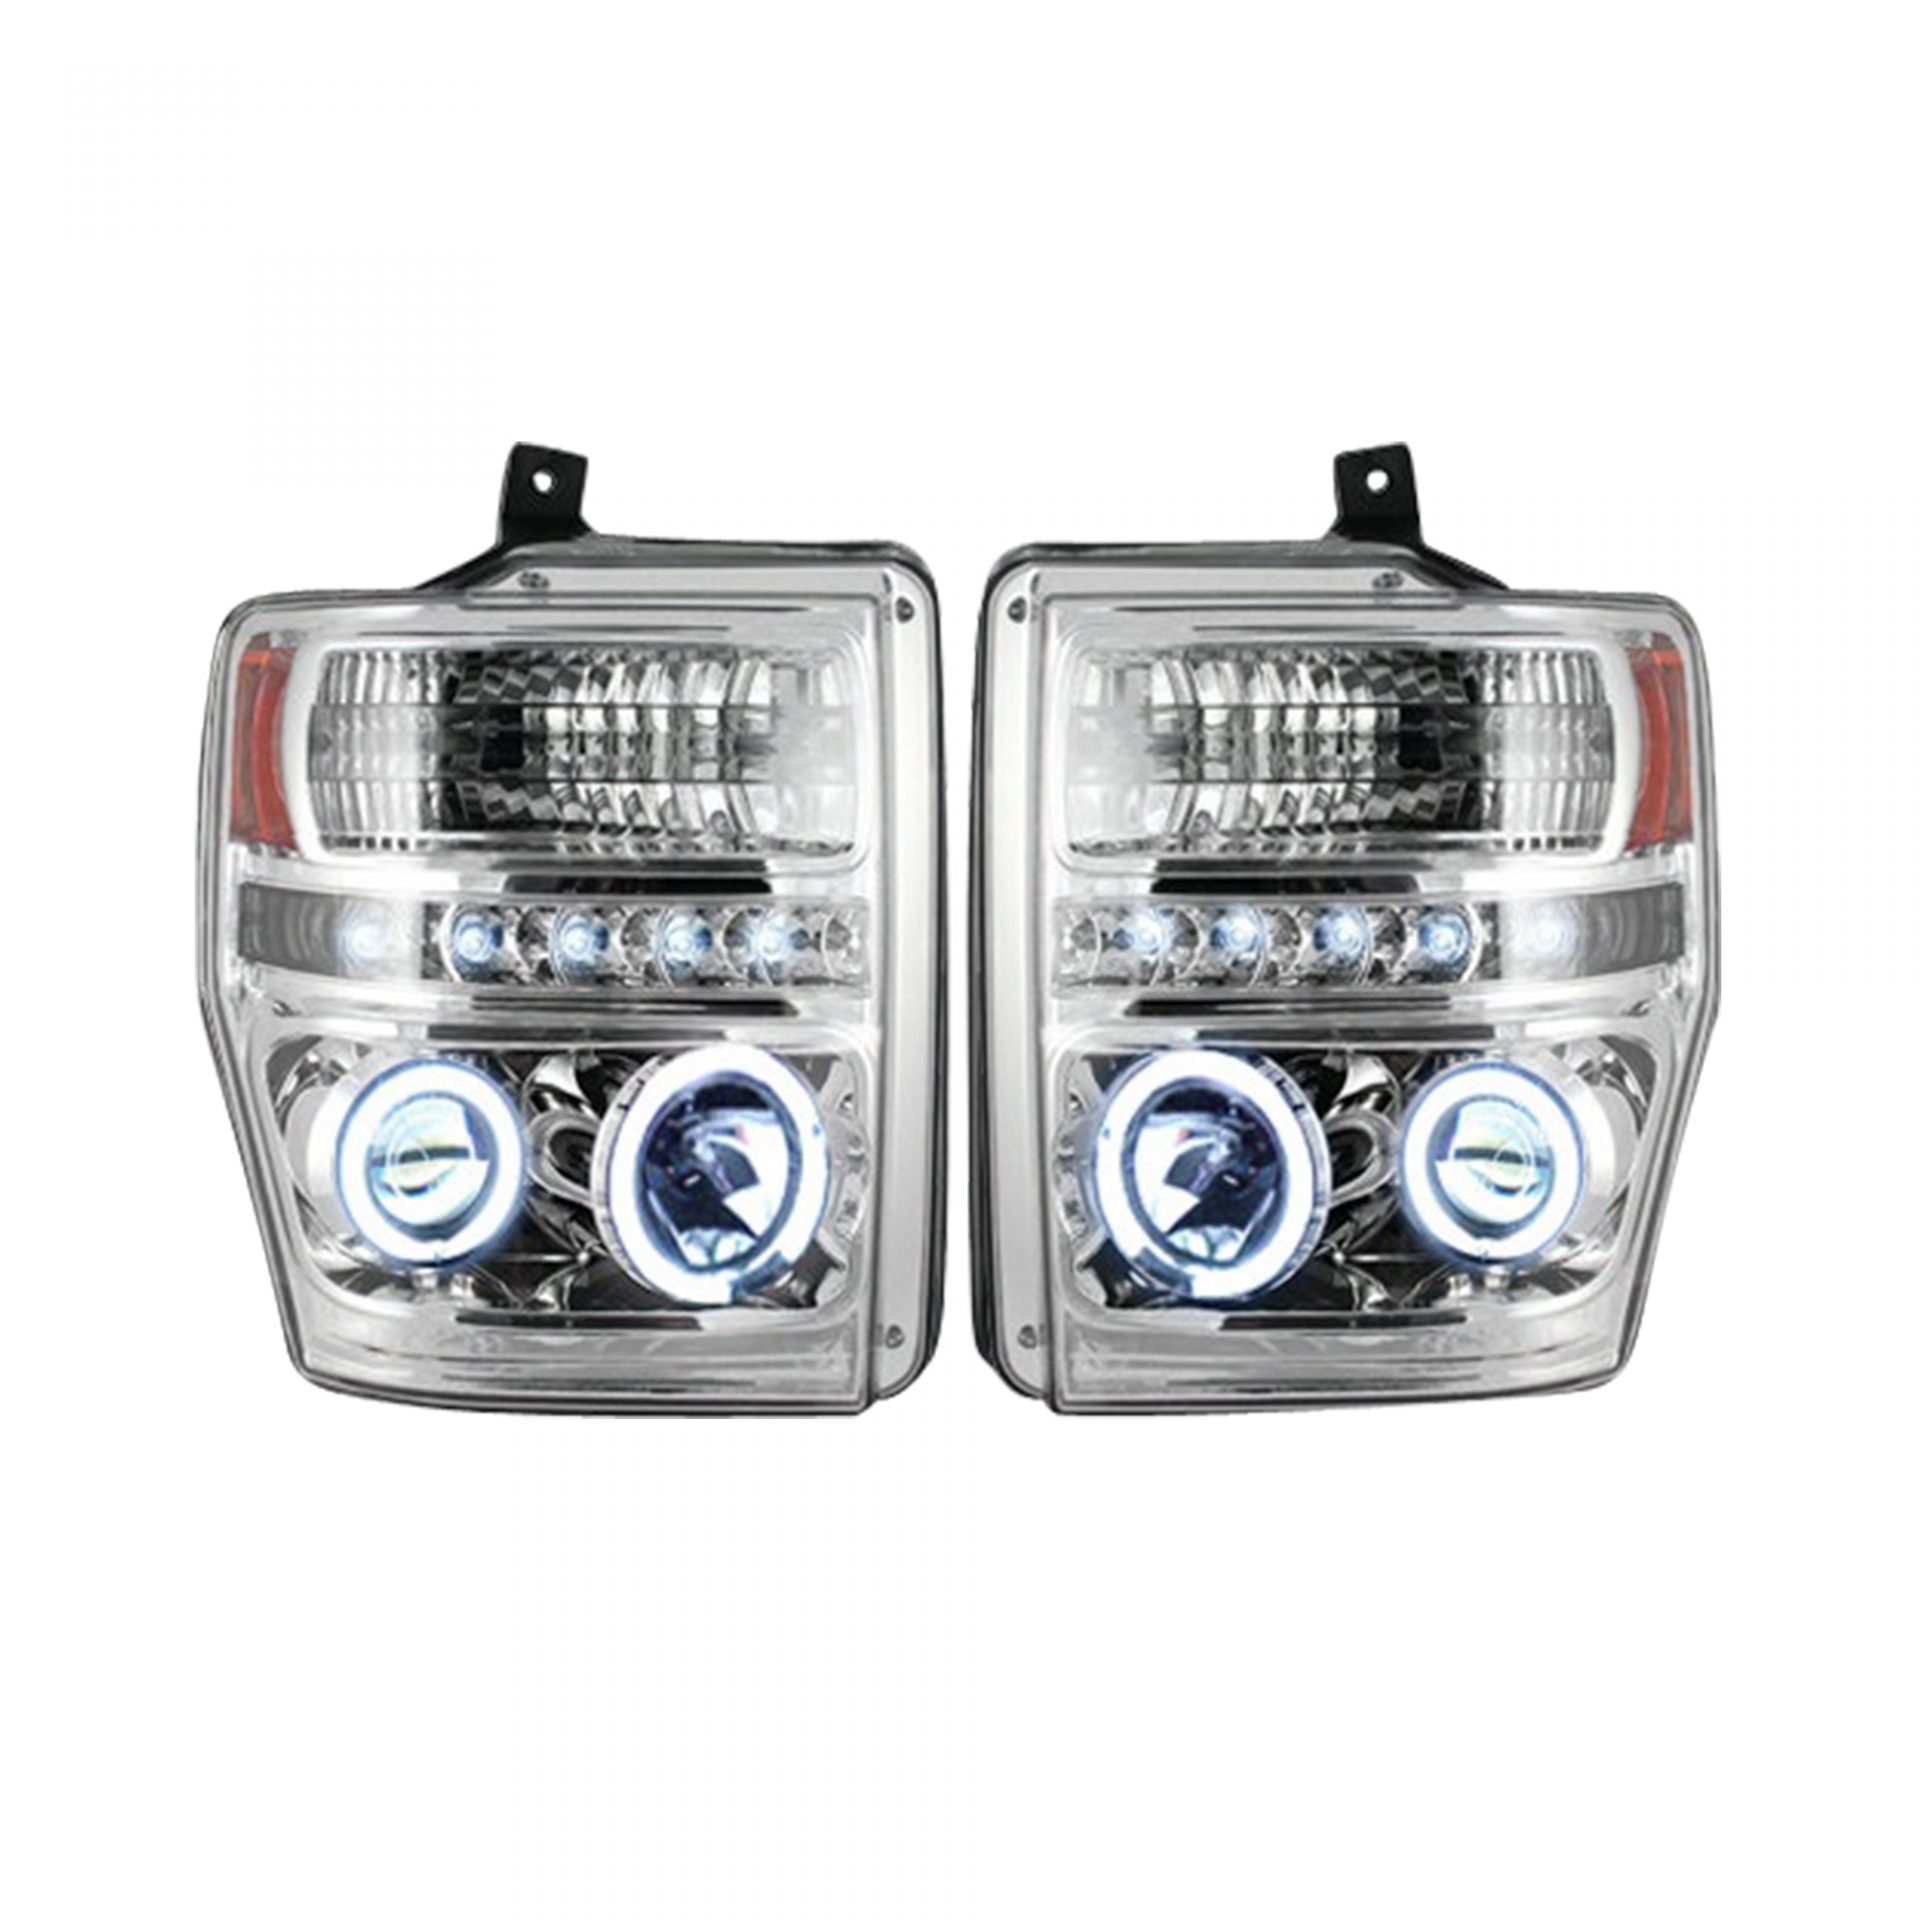 Ford Super Duty 08-10 Projector Headlights in Clear/Chrome